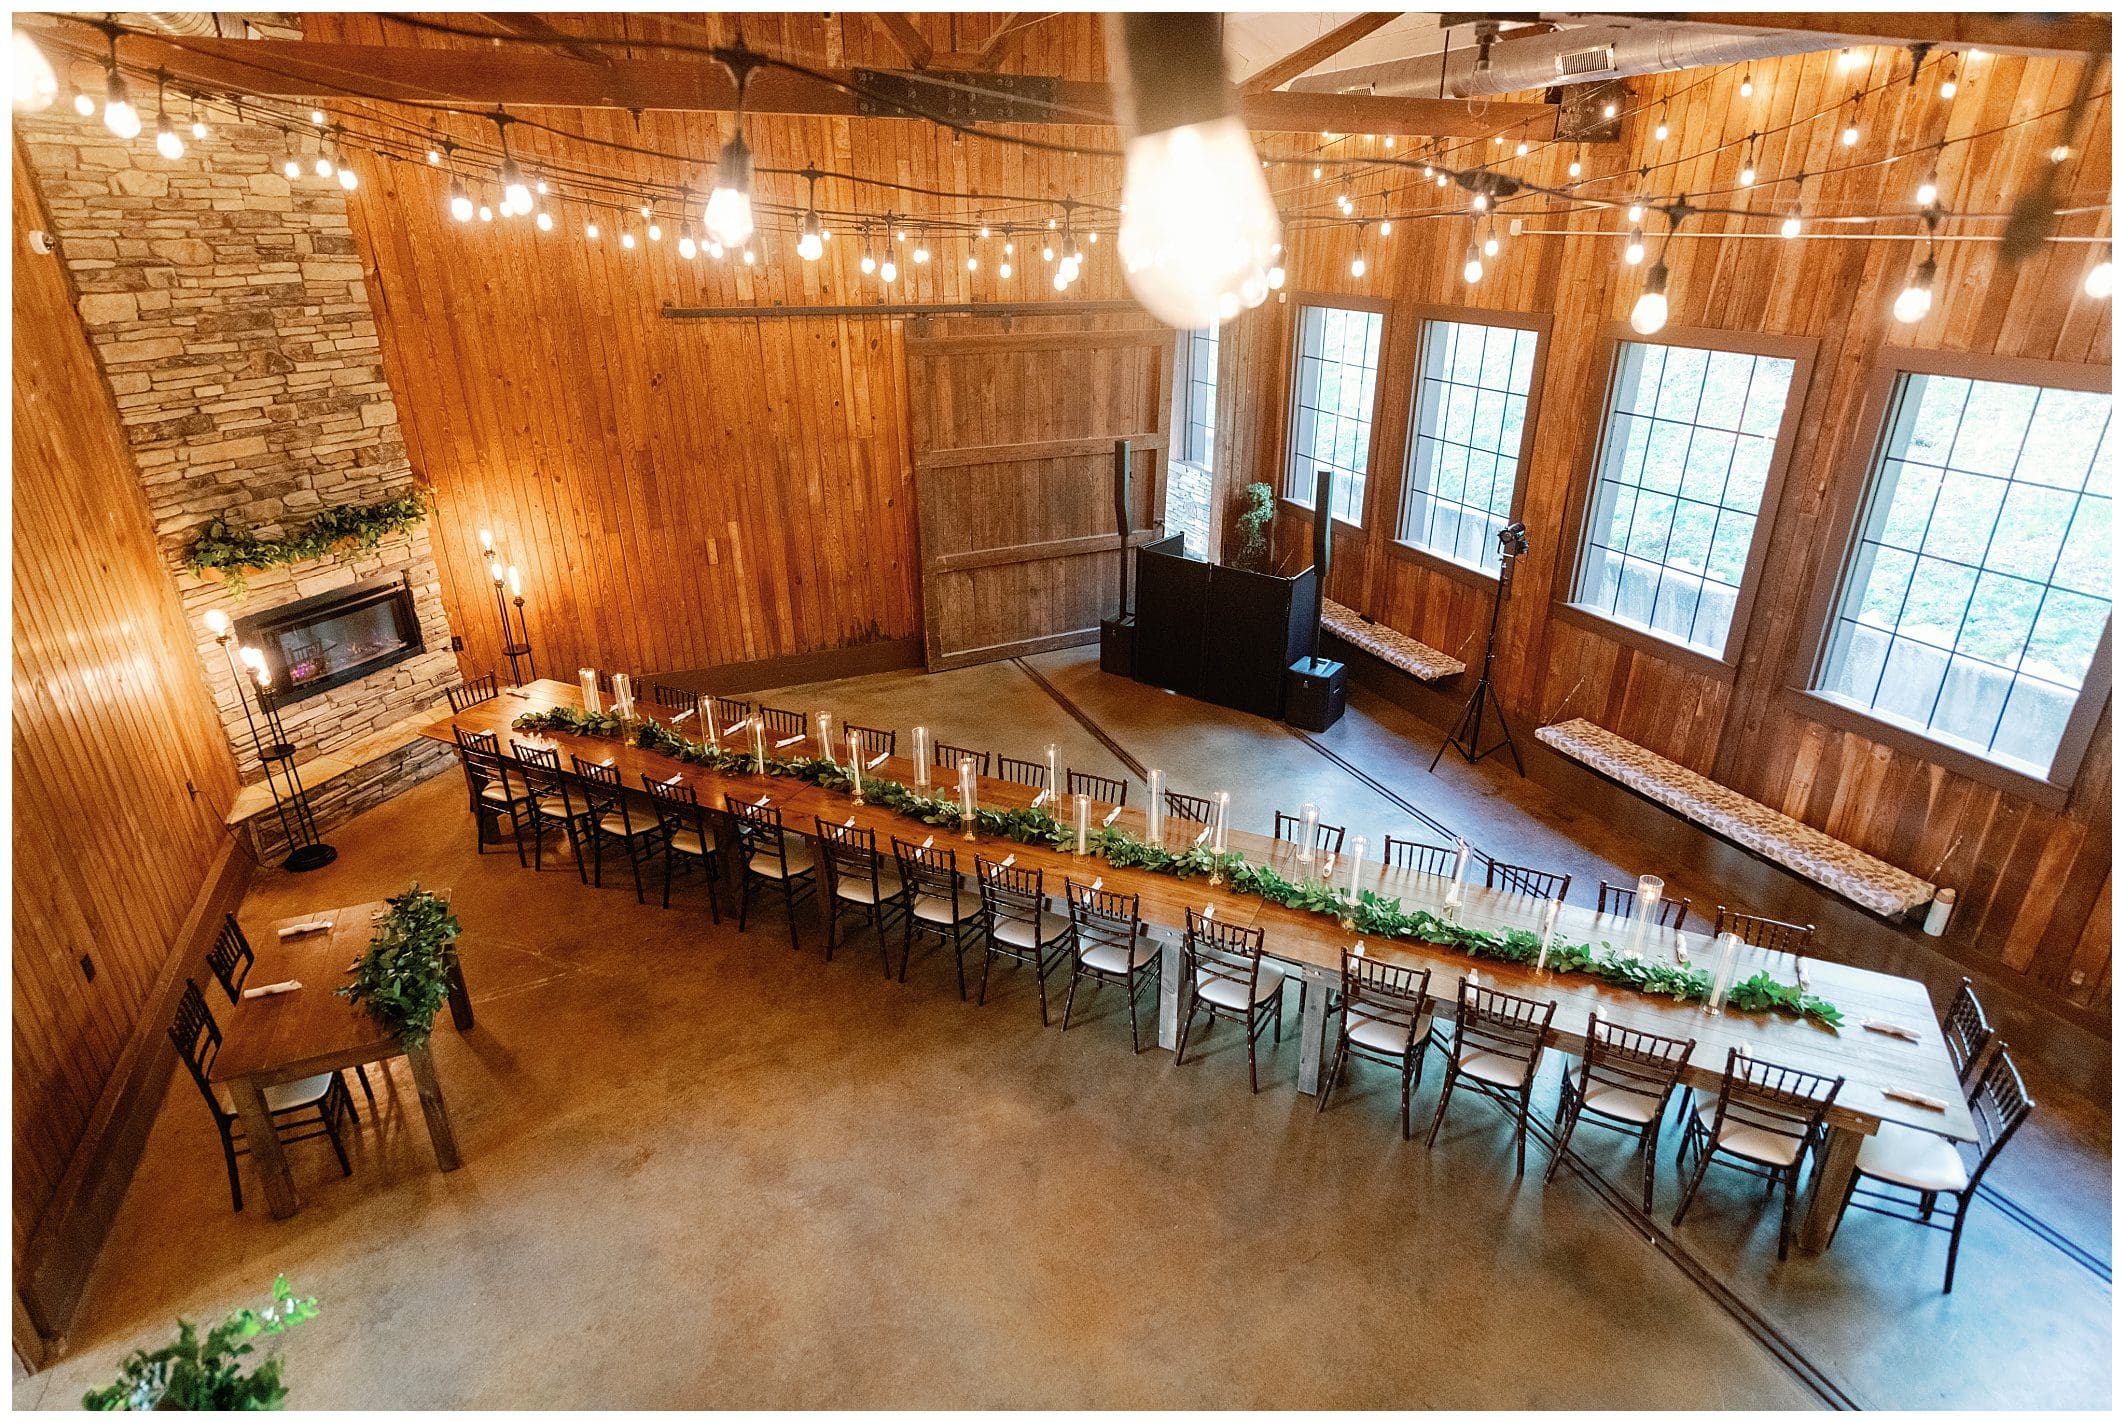 Rustic banquet hall interior with long dining tables set for a meal, string lights overhead, and large windows.